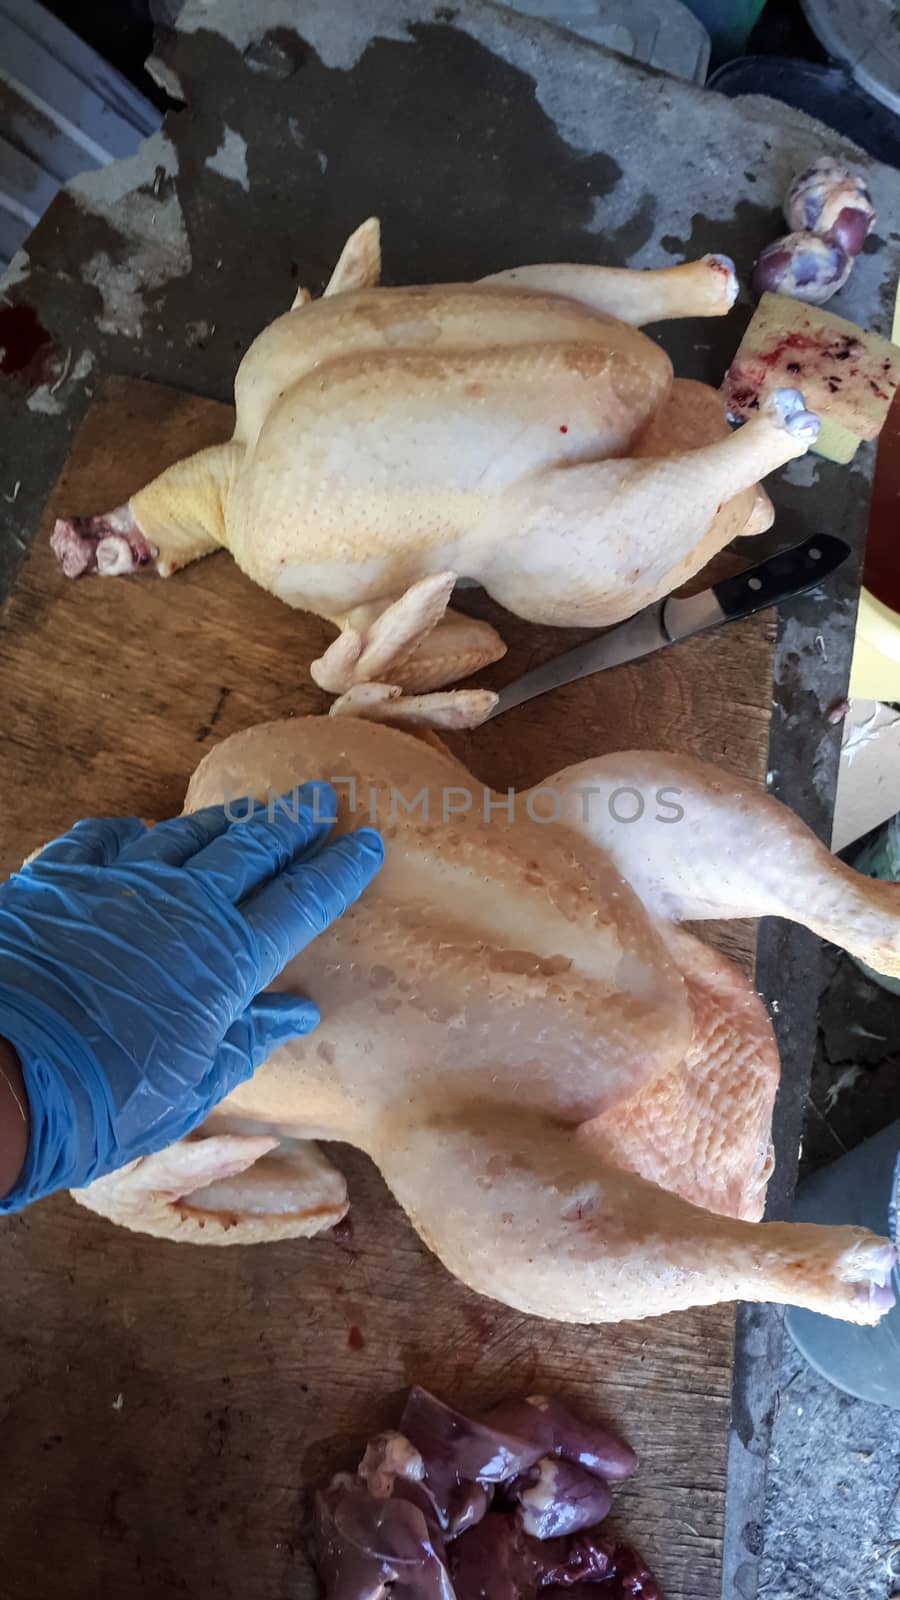 Cutting the broiler carcass on the cutting board. Homemade chicken.